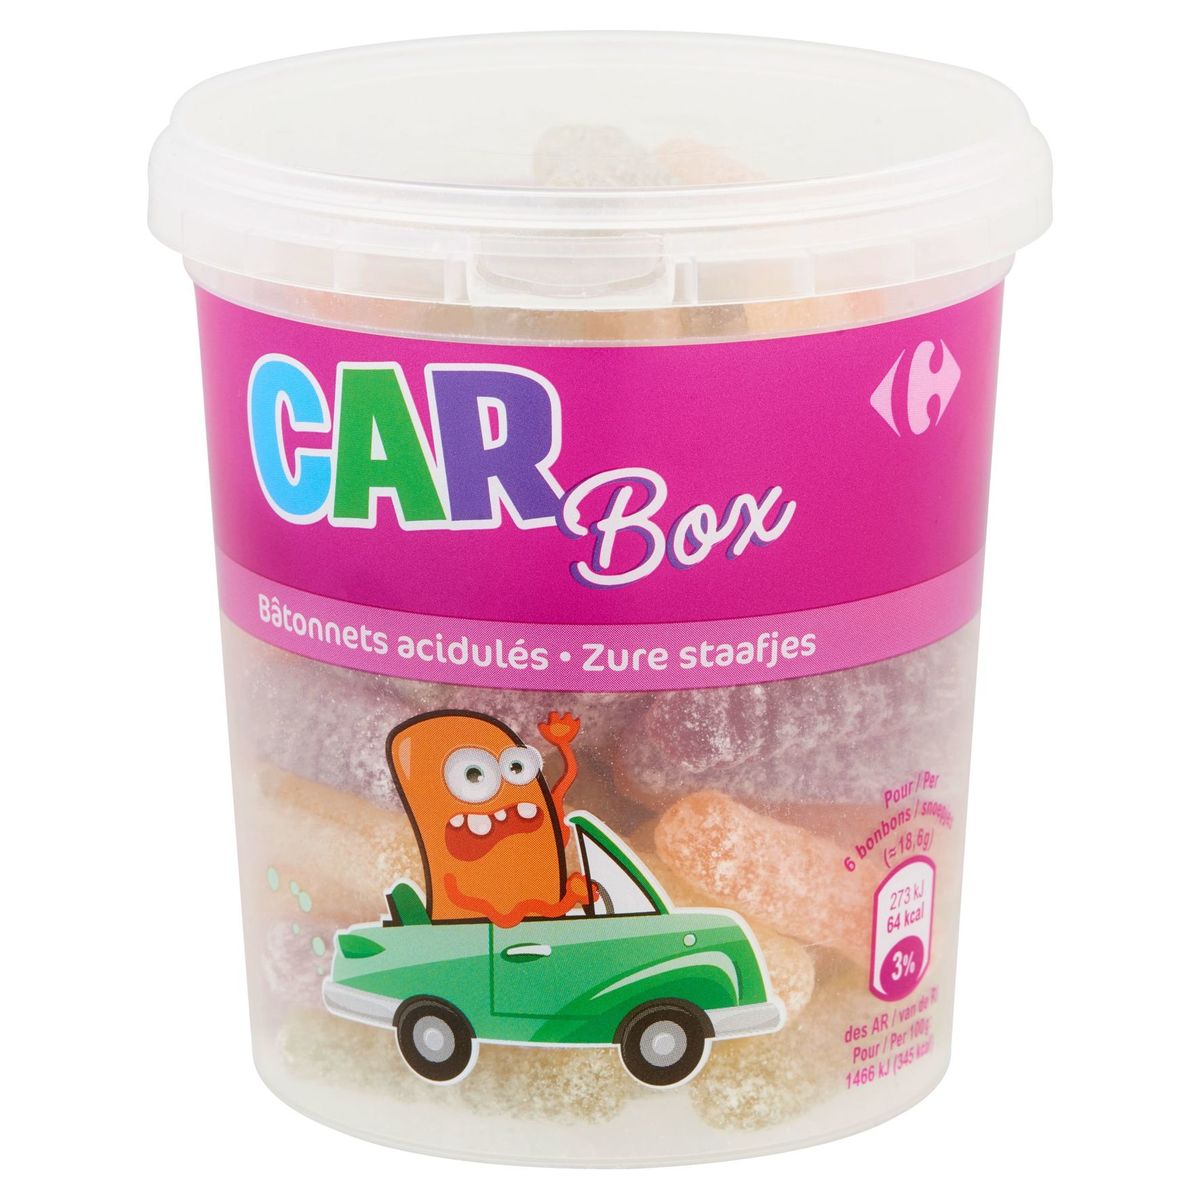 Carrefour Car Box Zure Staafjes 220 g